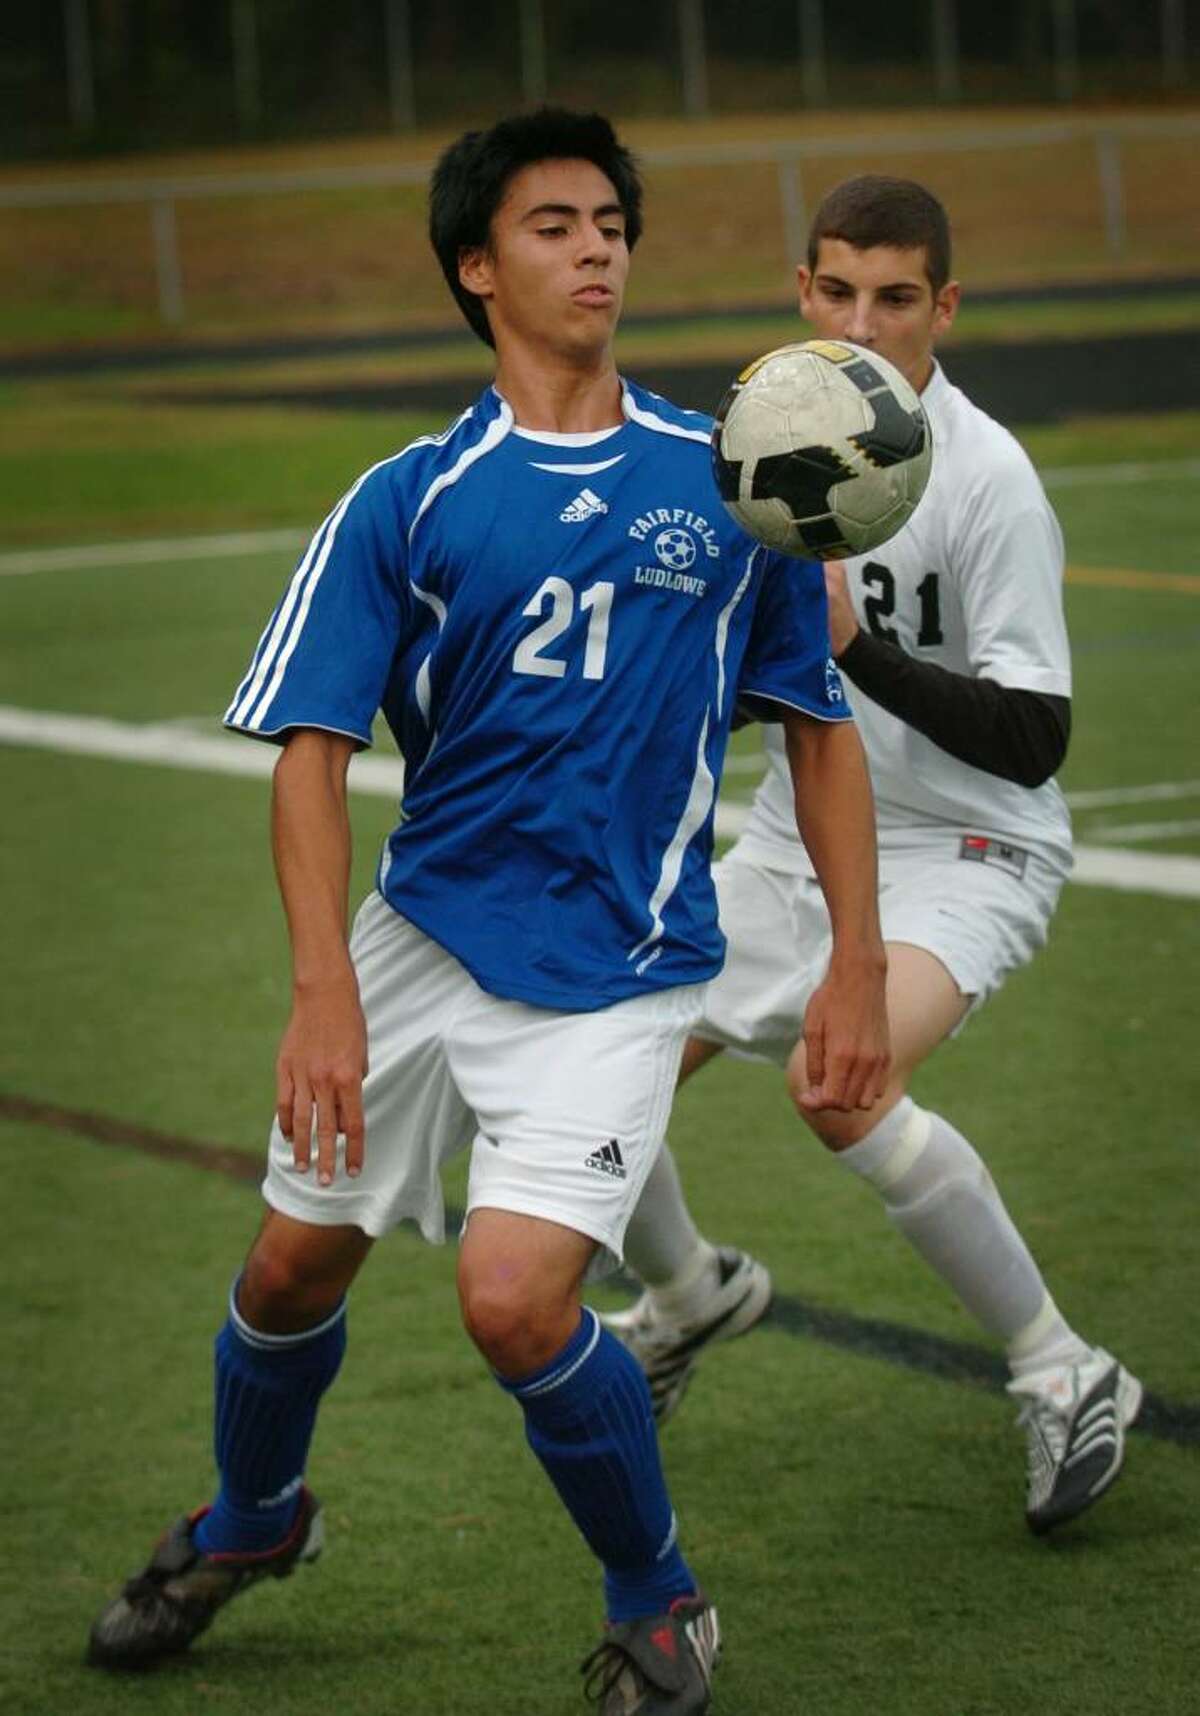 Fairfield Ludlowe's Christan Barral plays the ball in front of Trumbull defender Matthew Romano during Monday's FCIAC matchup at Trumbull High School.